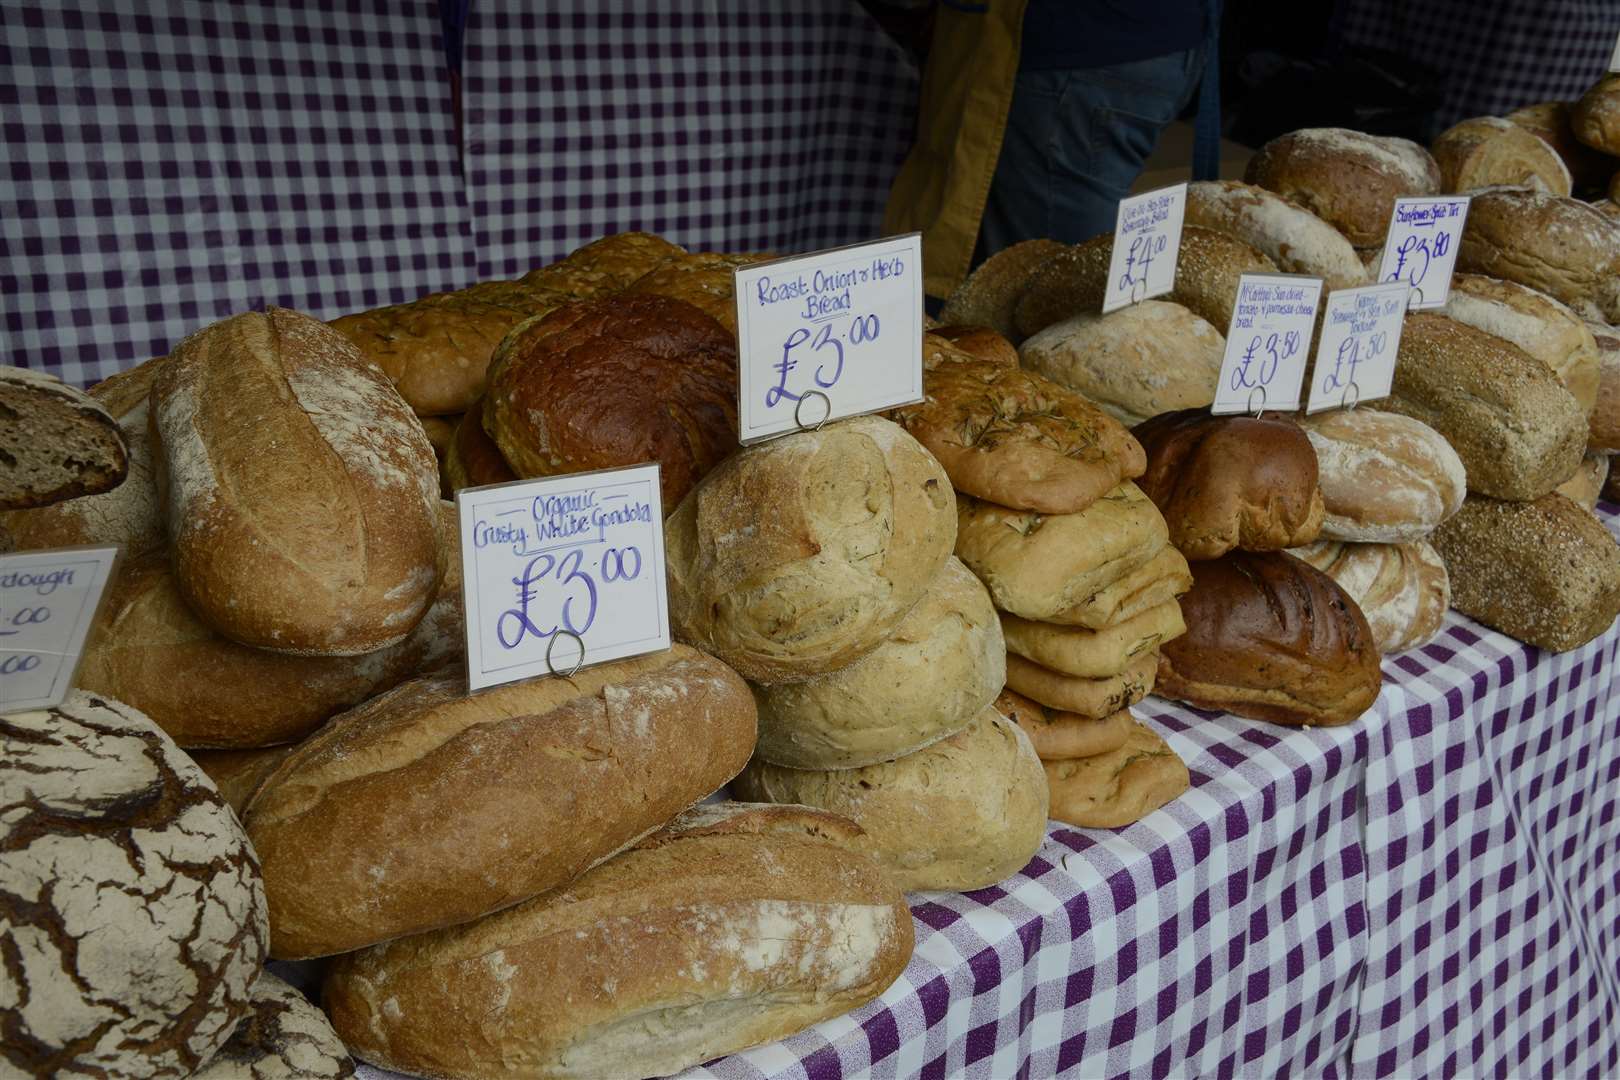 Tasty treats at the Broadstairs Food Festival